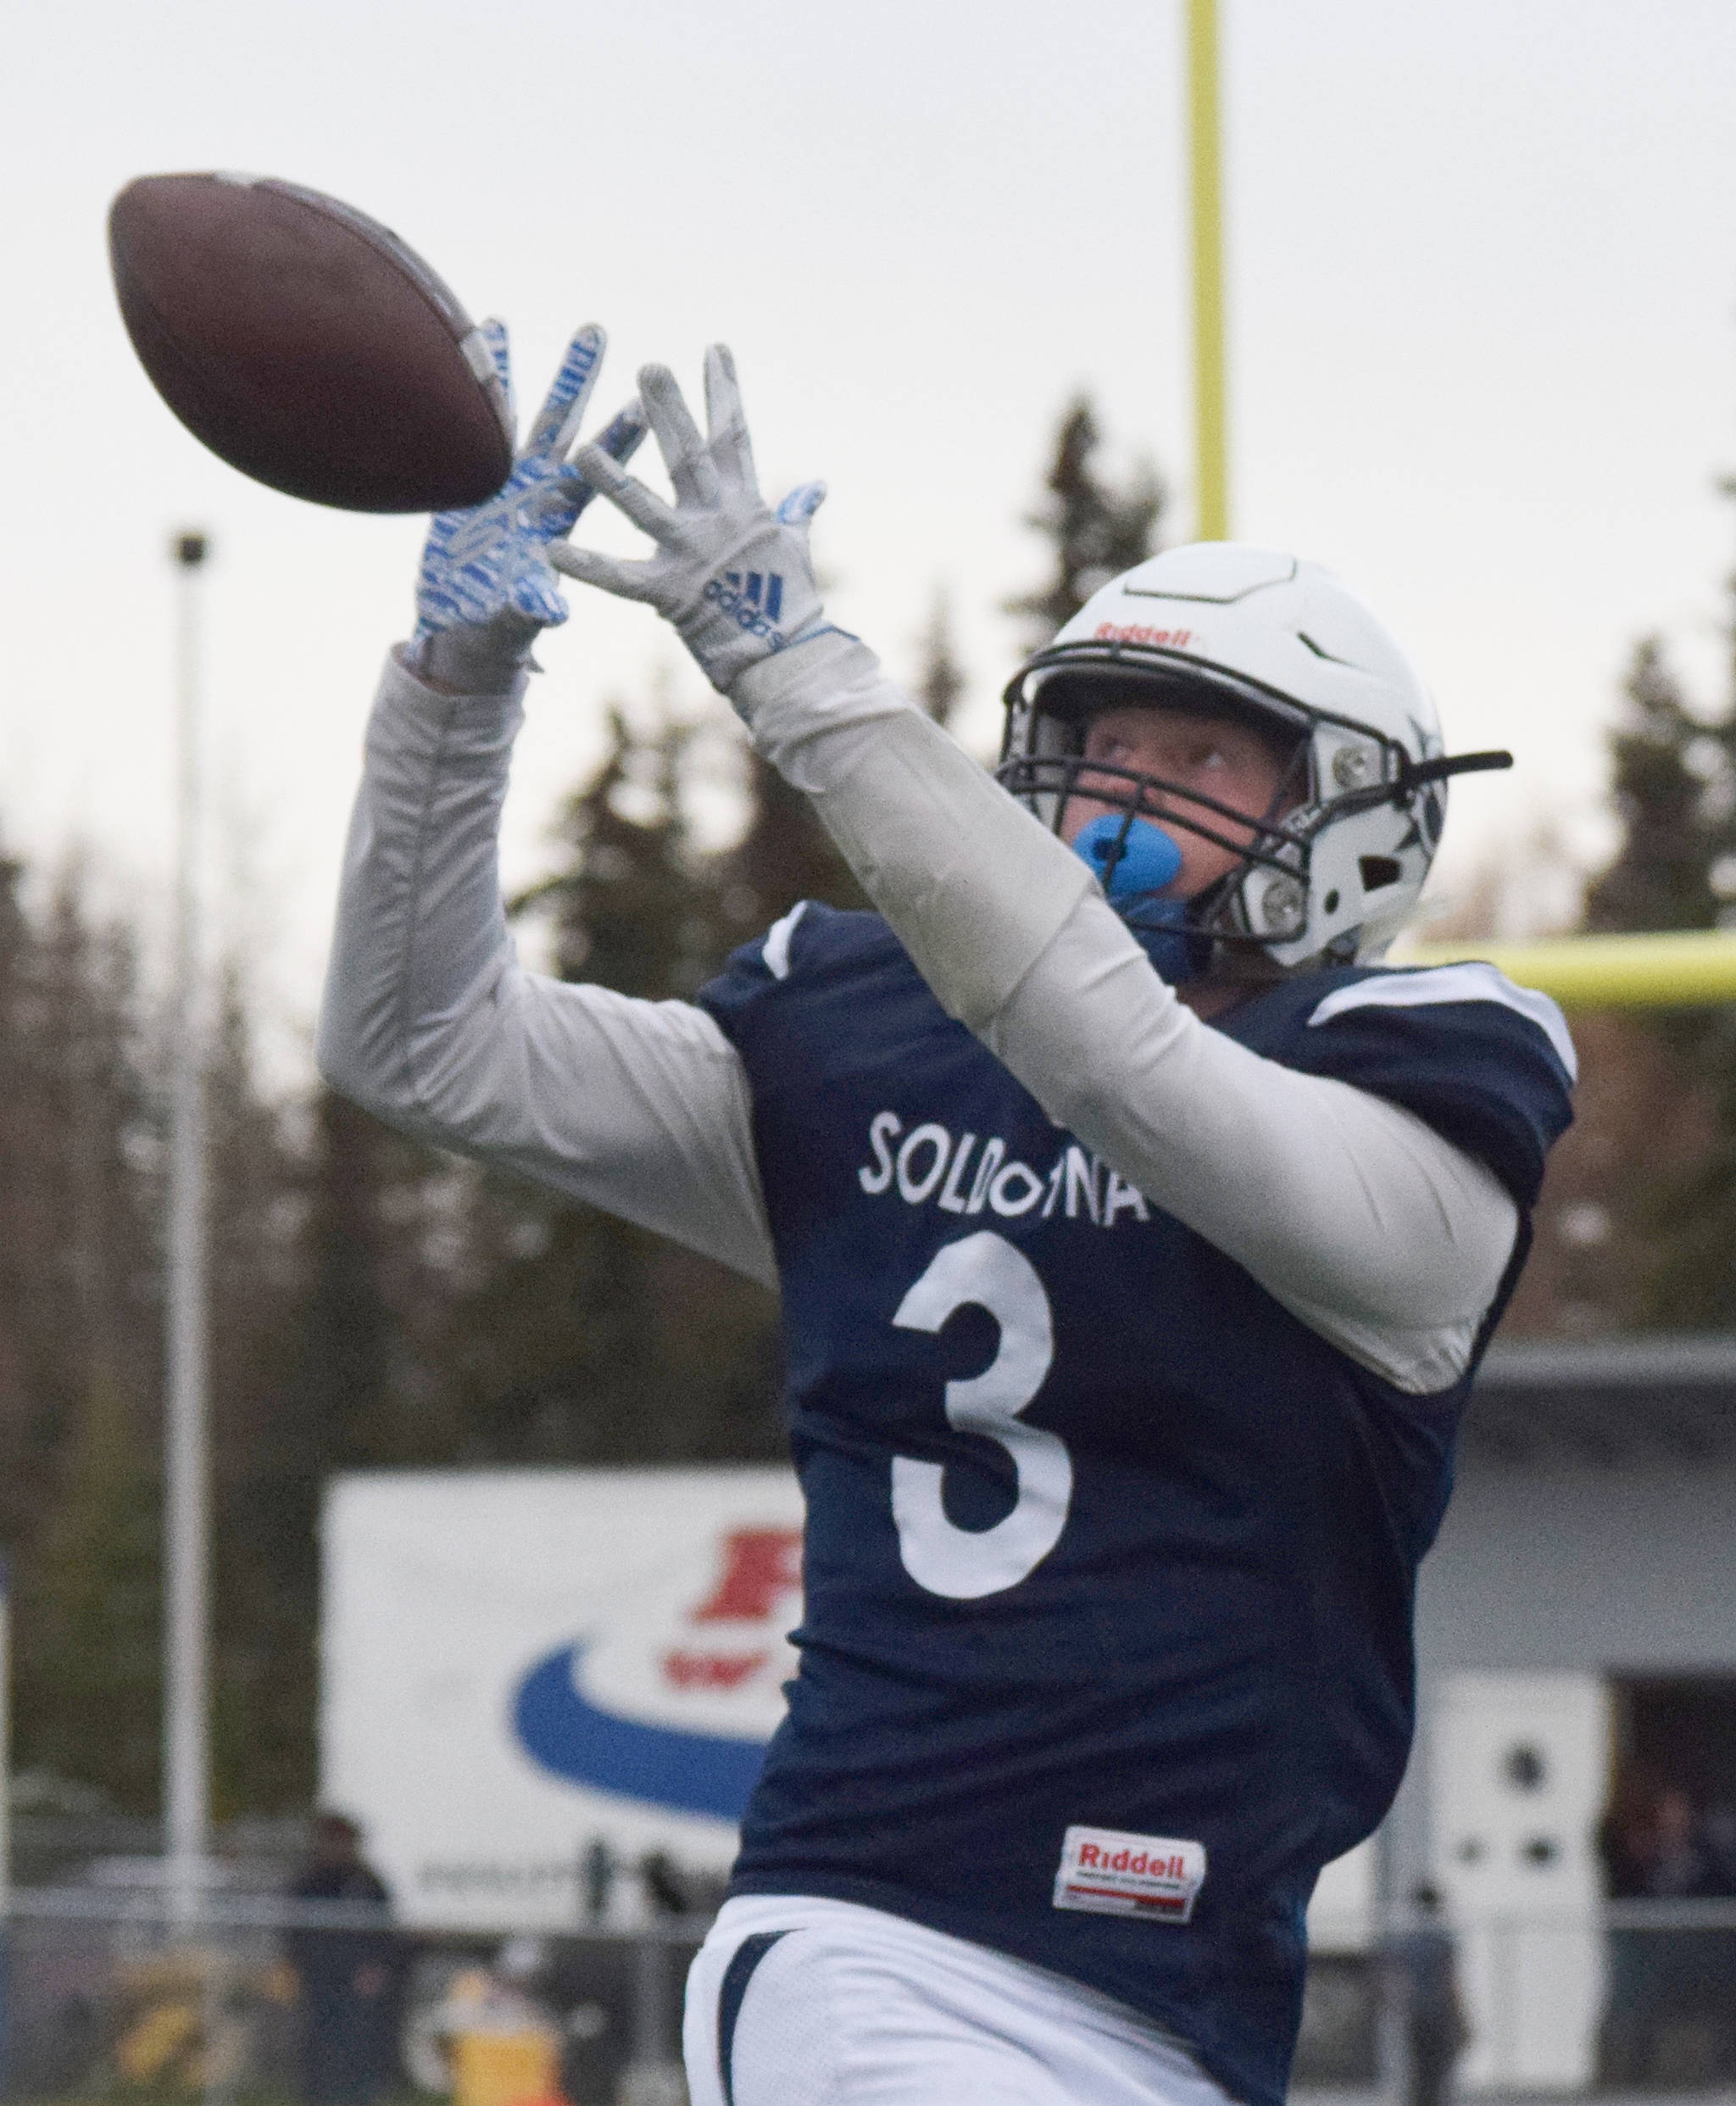 Soldotna’s Galen Brantley III makes a catch in a Div. II state semifinal against West Valley Friday, Oct. 11, 2019, in Soldotna, Alaska. (Photo by Joey Klecka/Peninsula Clarion)